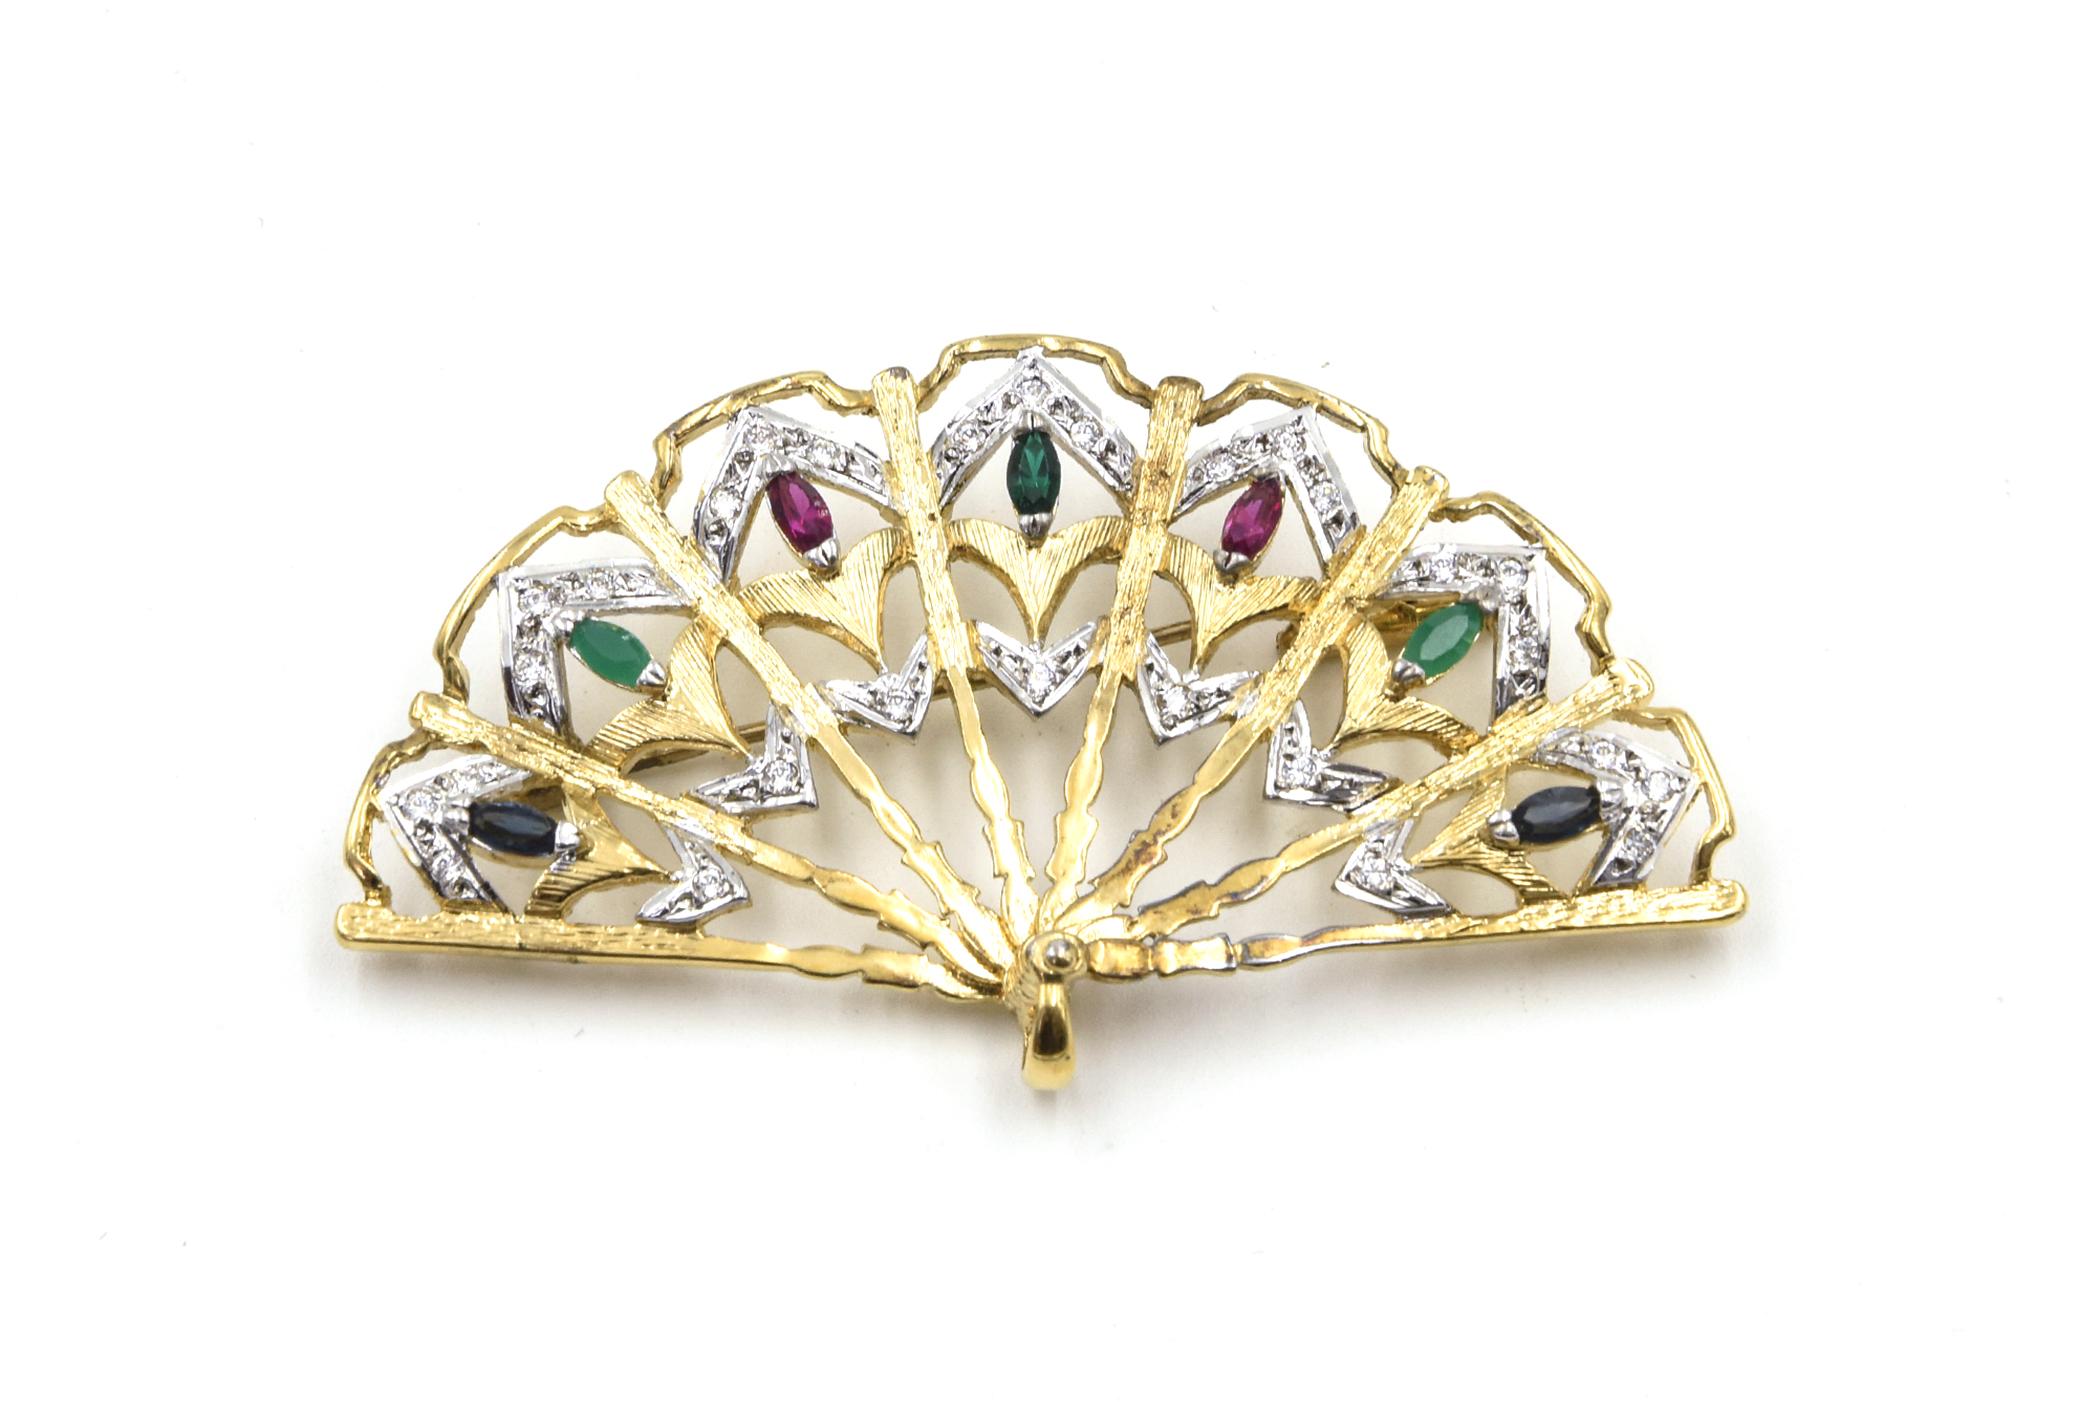 Fabulous Fan Brooch and Earring Set

Looking at them you can just imagine flicking them open - although they do not move. This costume pair of gold tone earrings with a matching brooch contain faux diamonds, emerald, ruby and sapphires.  The